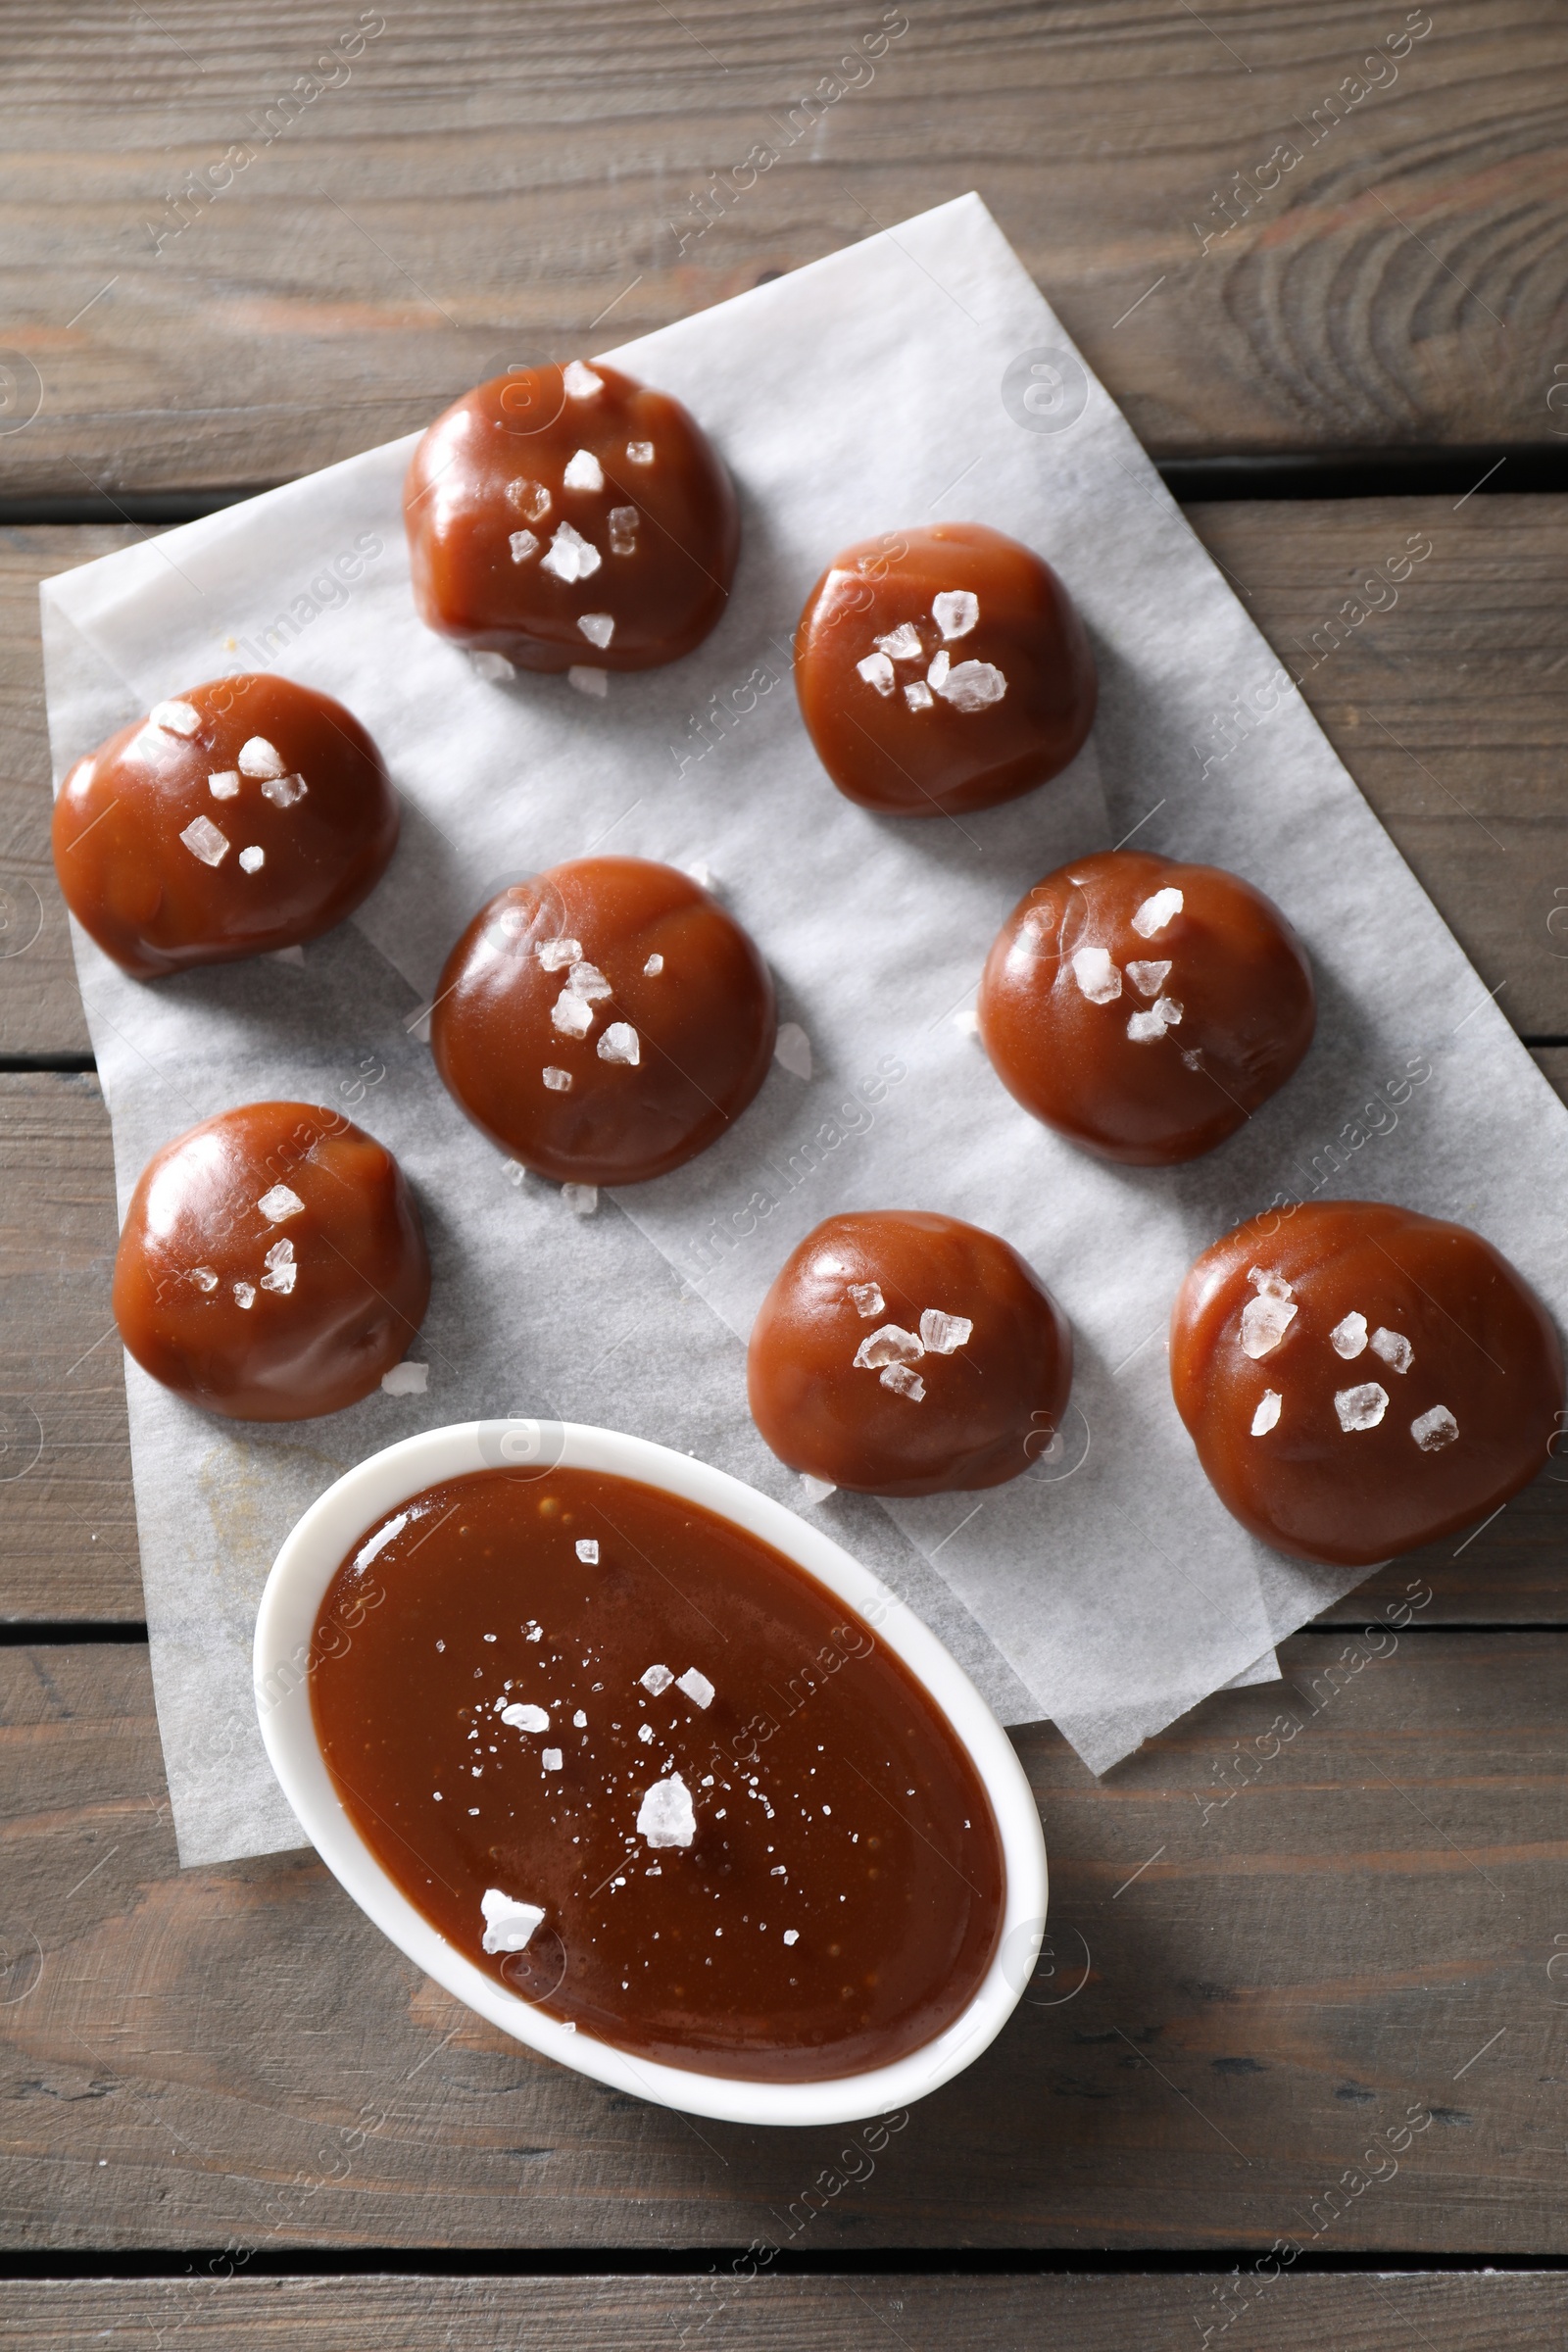 Photo of Tasty candies, caramel sauce and salt on wooden table, top view